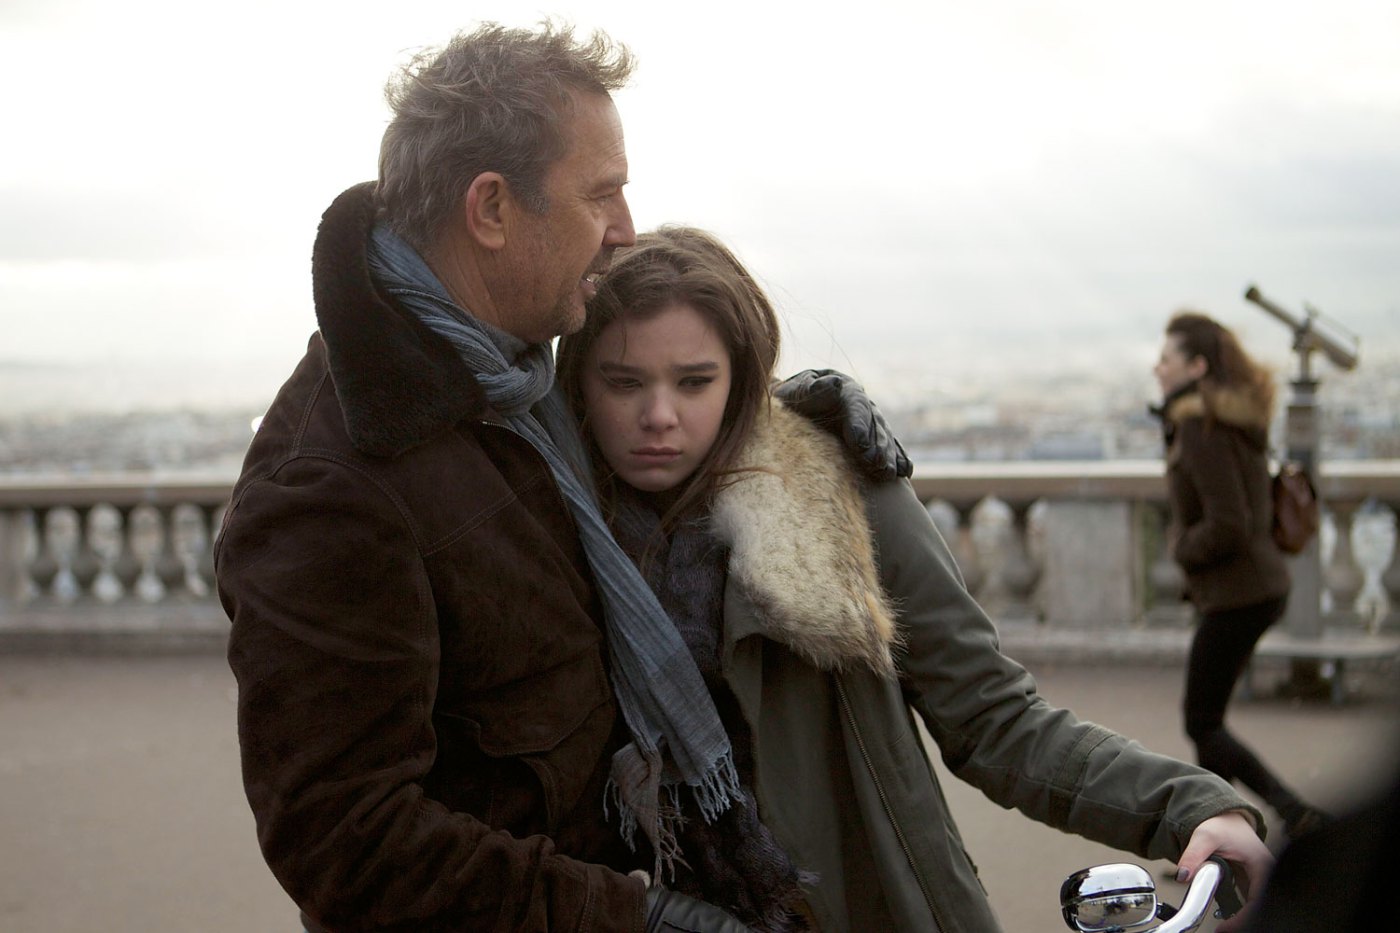 Kevin Costner and Hailee Steinfeld star in 3 Days to Kill.